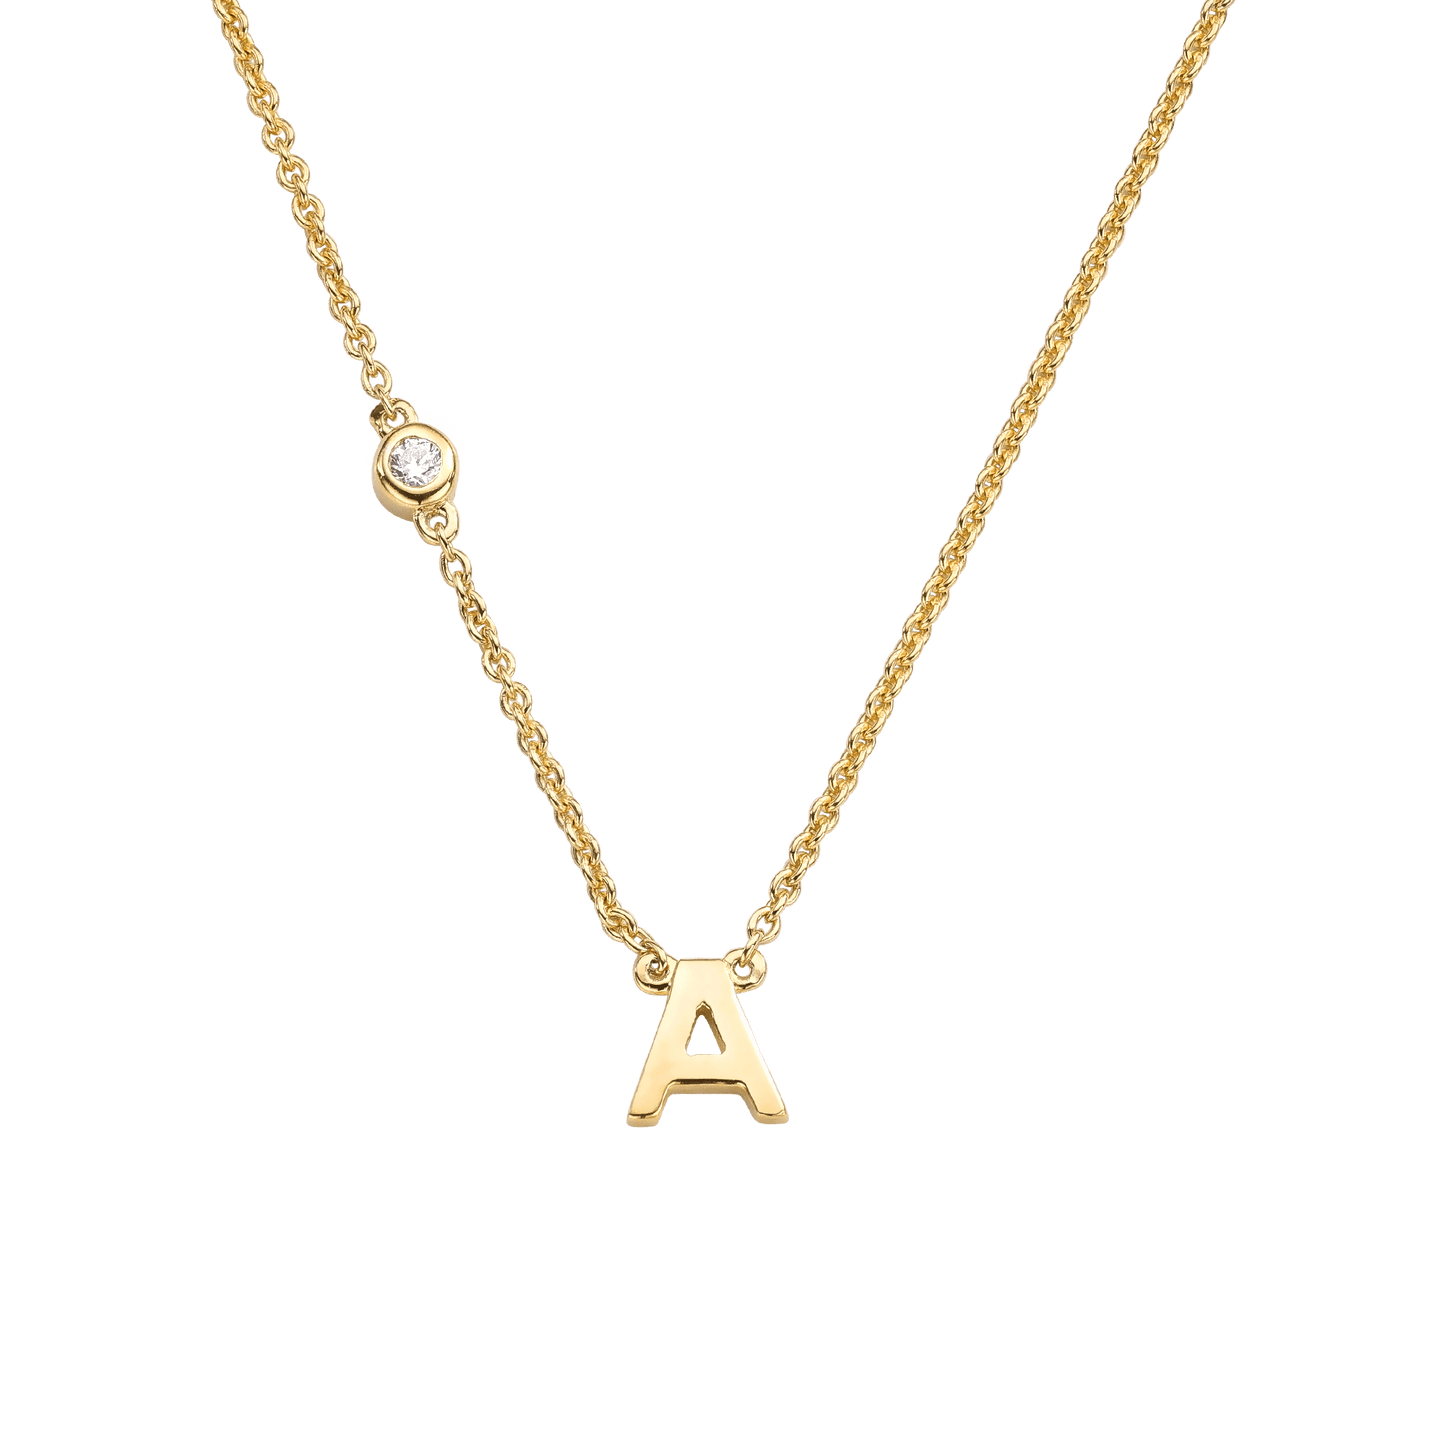 Initial Necklace with Diamonds - 14K Yellow Gold Necklaces magal-dev 